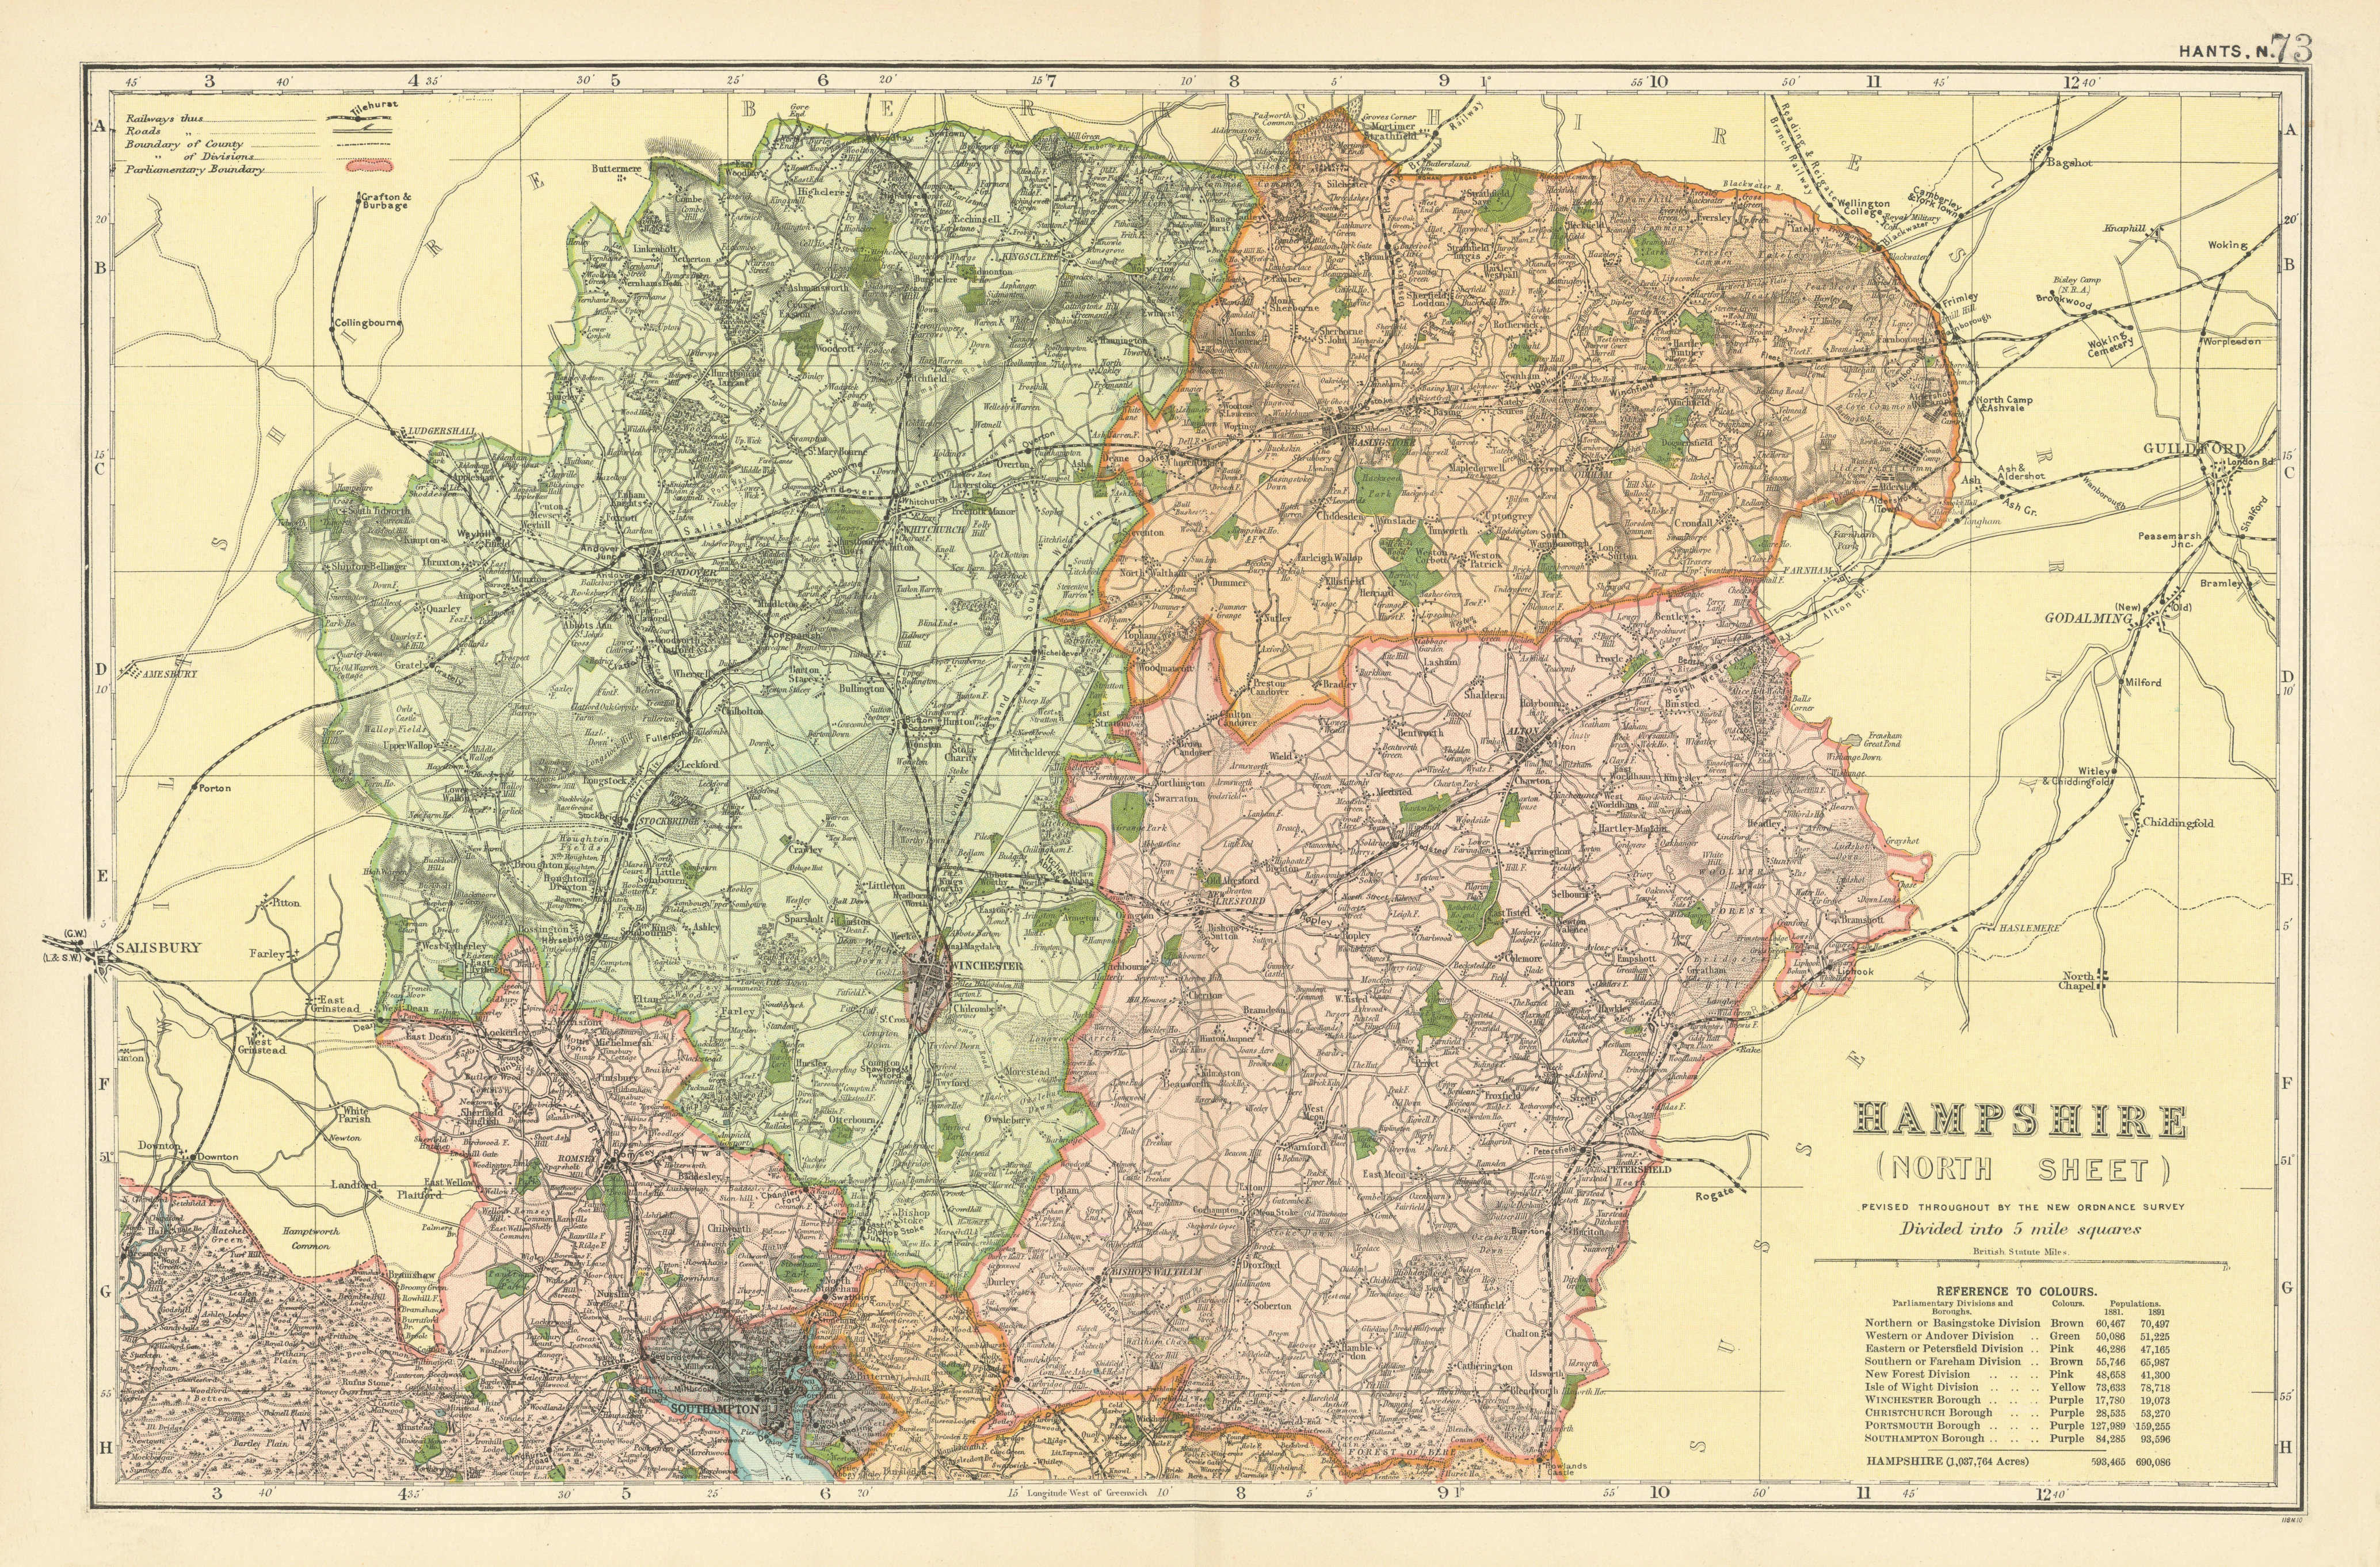 Associate Product HAMPSHIRE NORTH Parliamentary constituencies divisions.Railways.BACON 1900 map